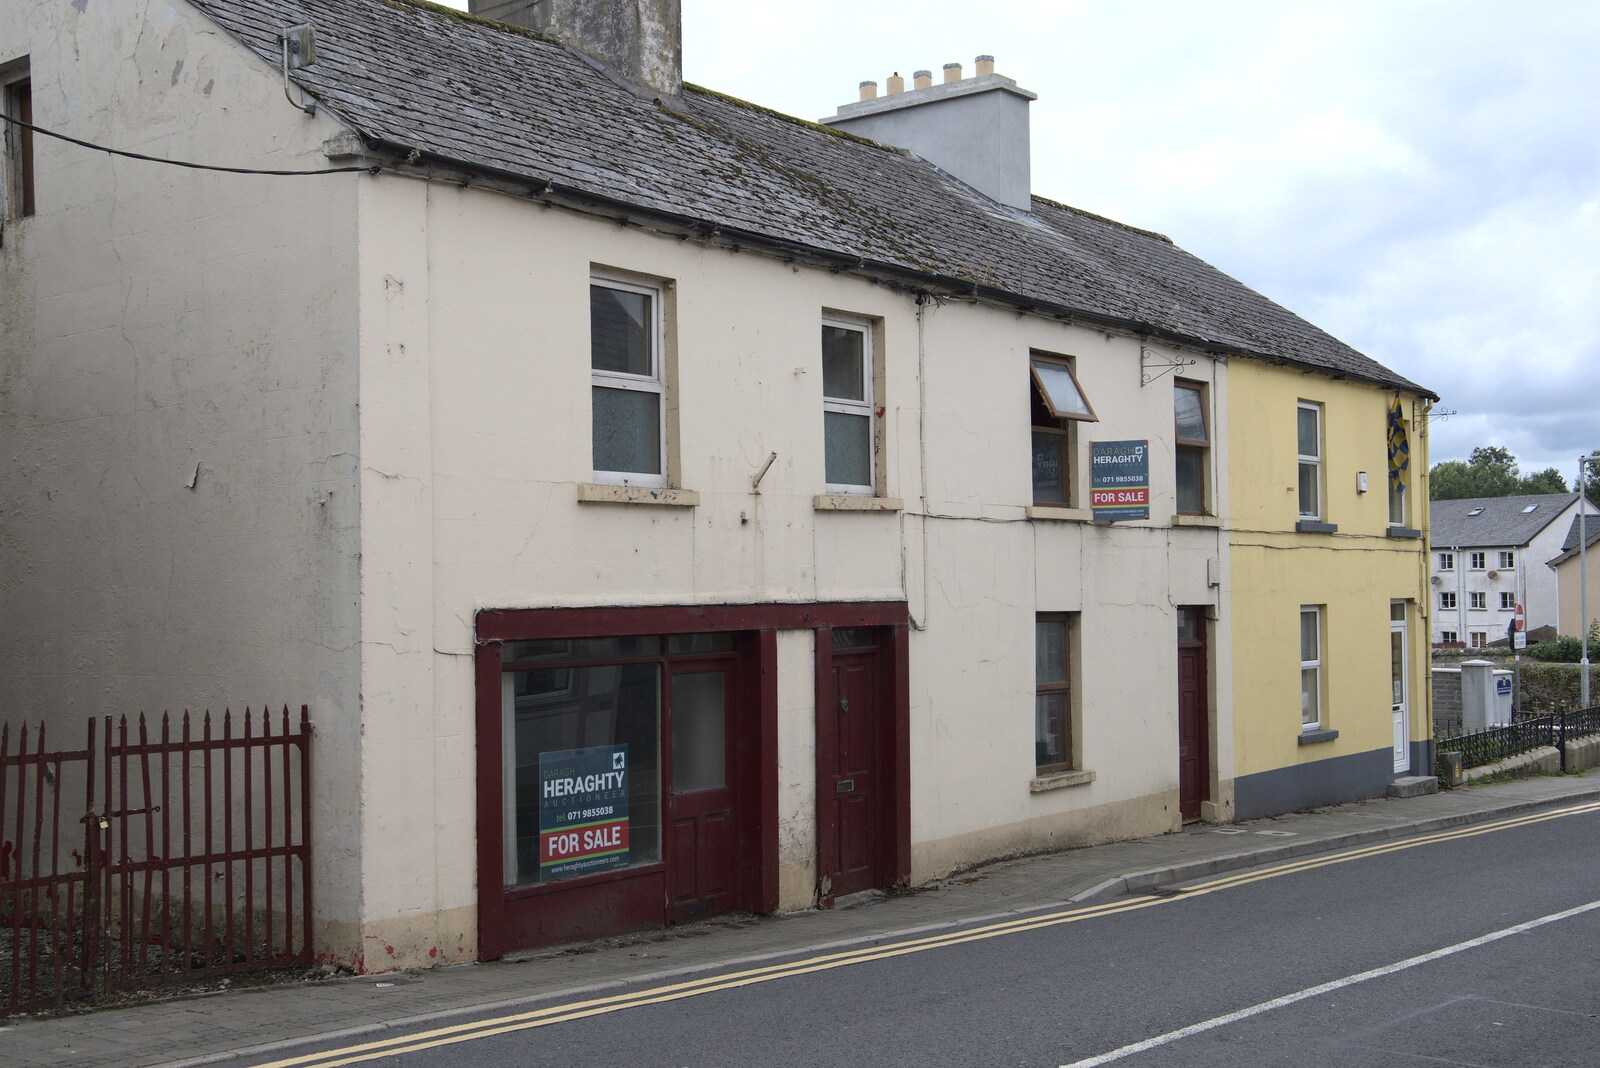 A Trip to Manorhamilton, County Leitrim, Ireland - 11th August 2021: More shops and houses long for sale